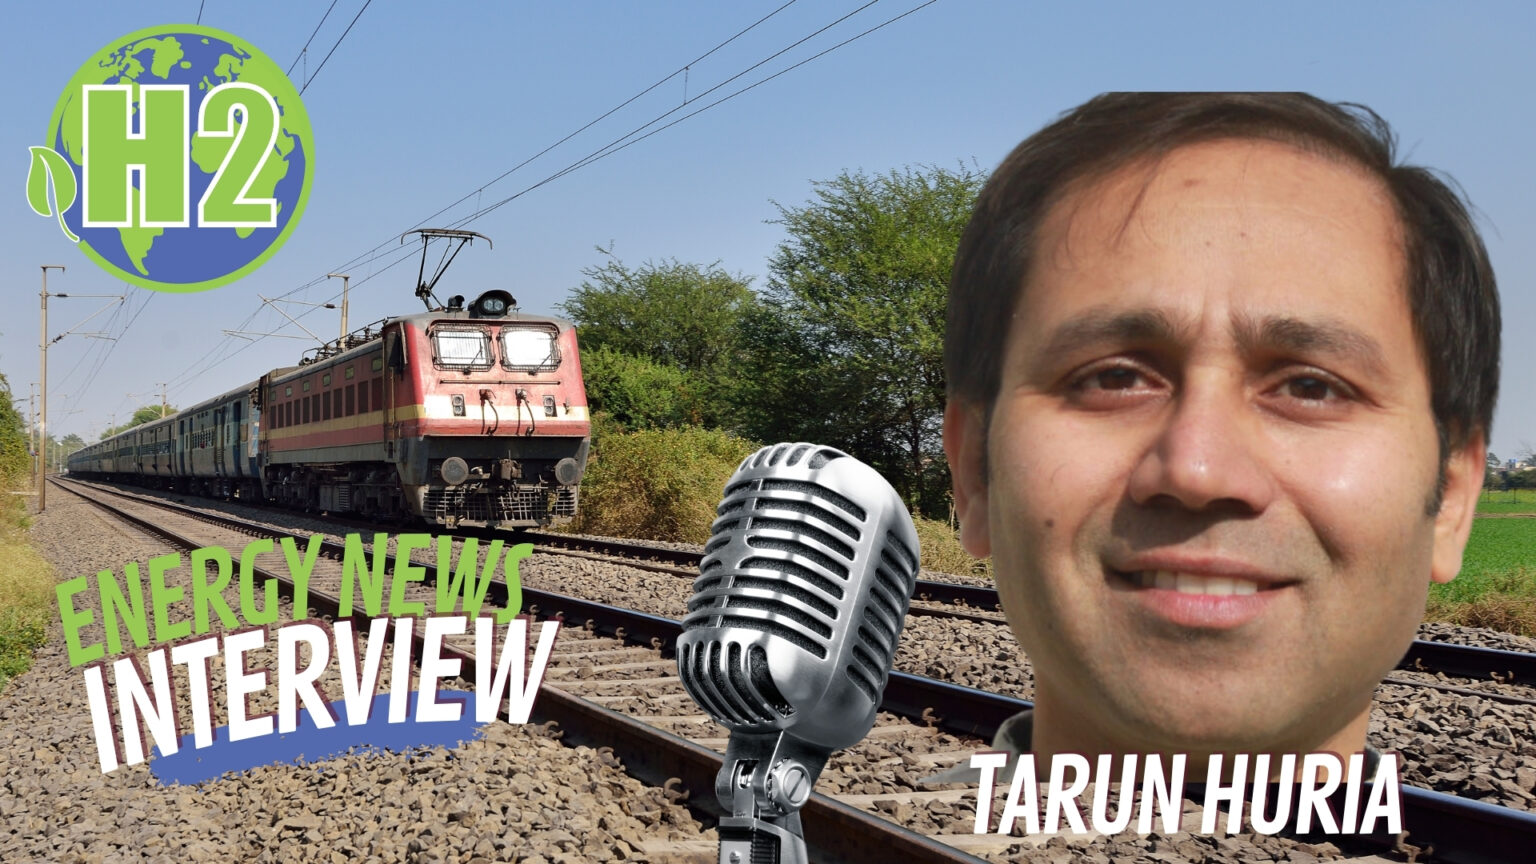 INTERVIEW: Hydrail in India with Dr. Tarun Huria